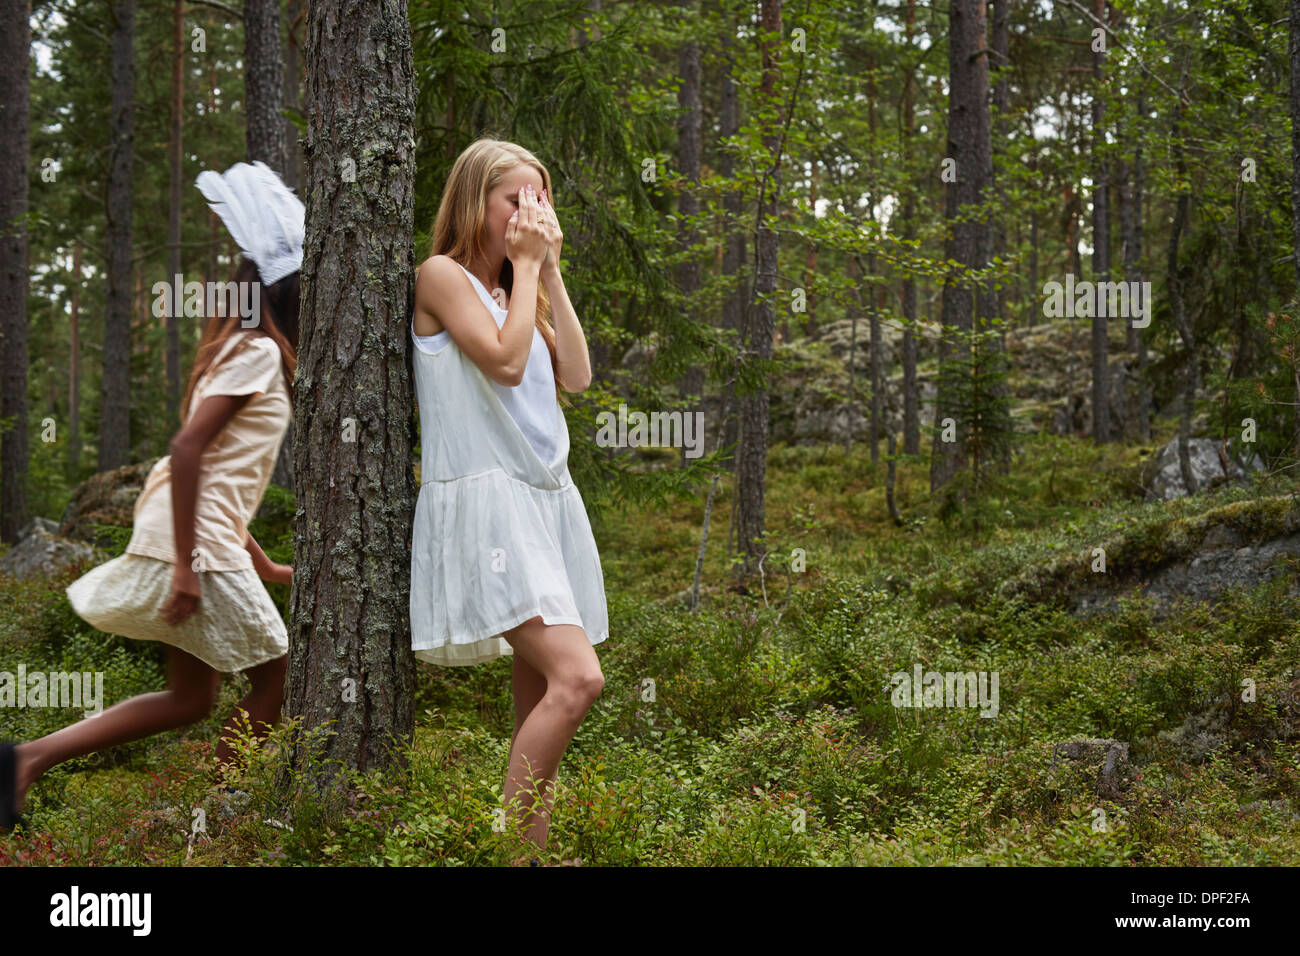 Teenage girls playing hide and seek in forest Stock Photo